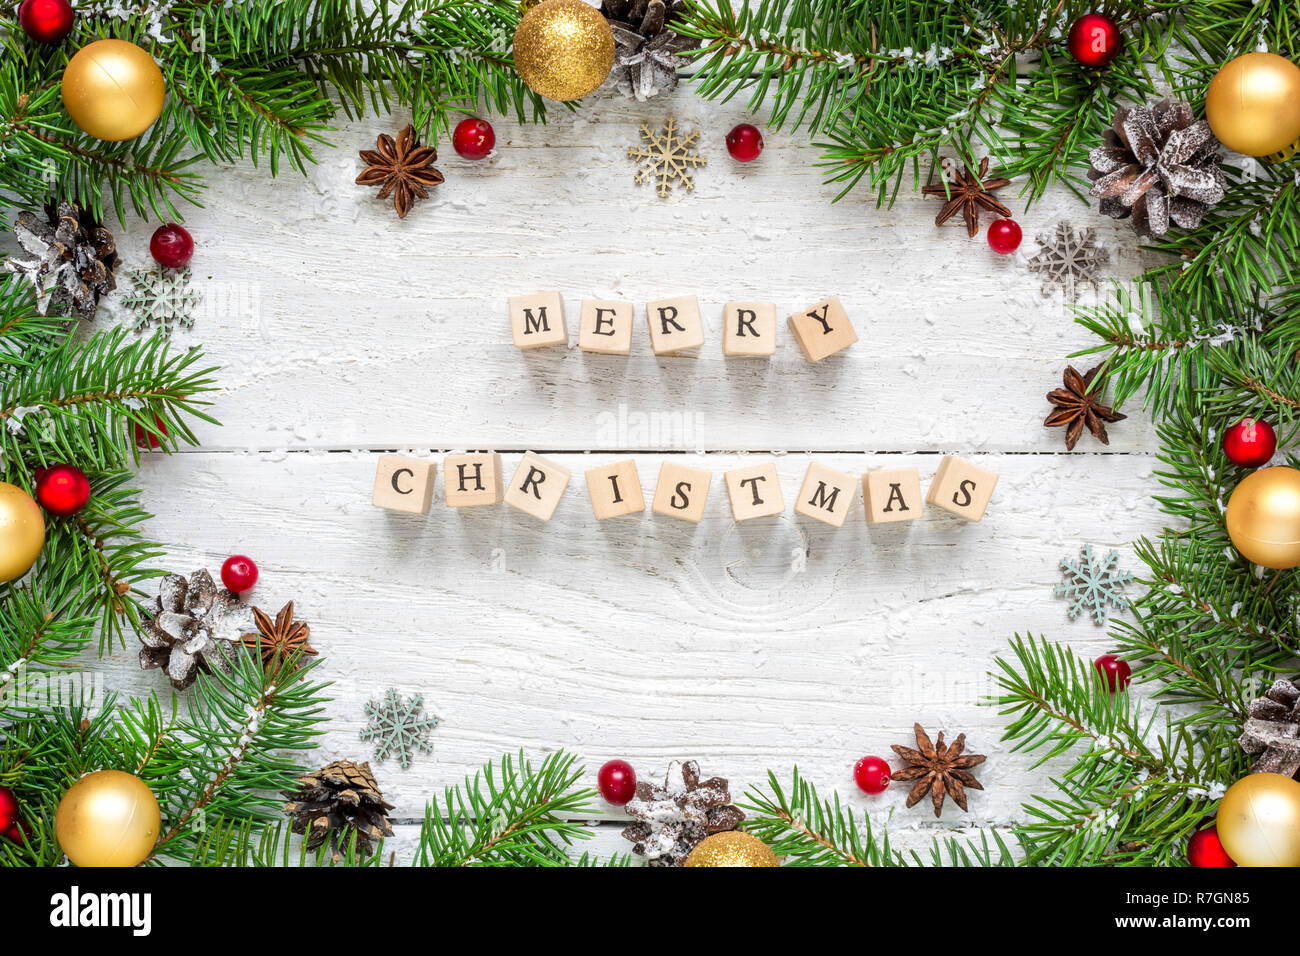 merry christmas inscription in frame made of fir branches, festive decorations and pine cones on white wooden table. Christmas background. Flat lay. t Stock Photo